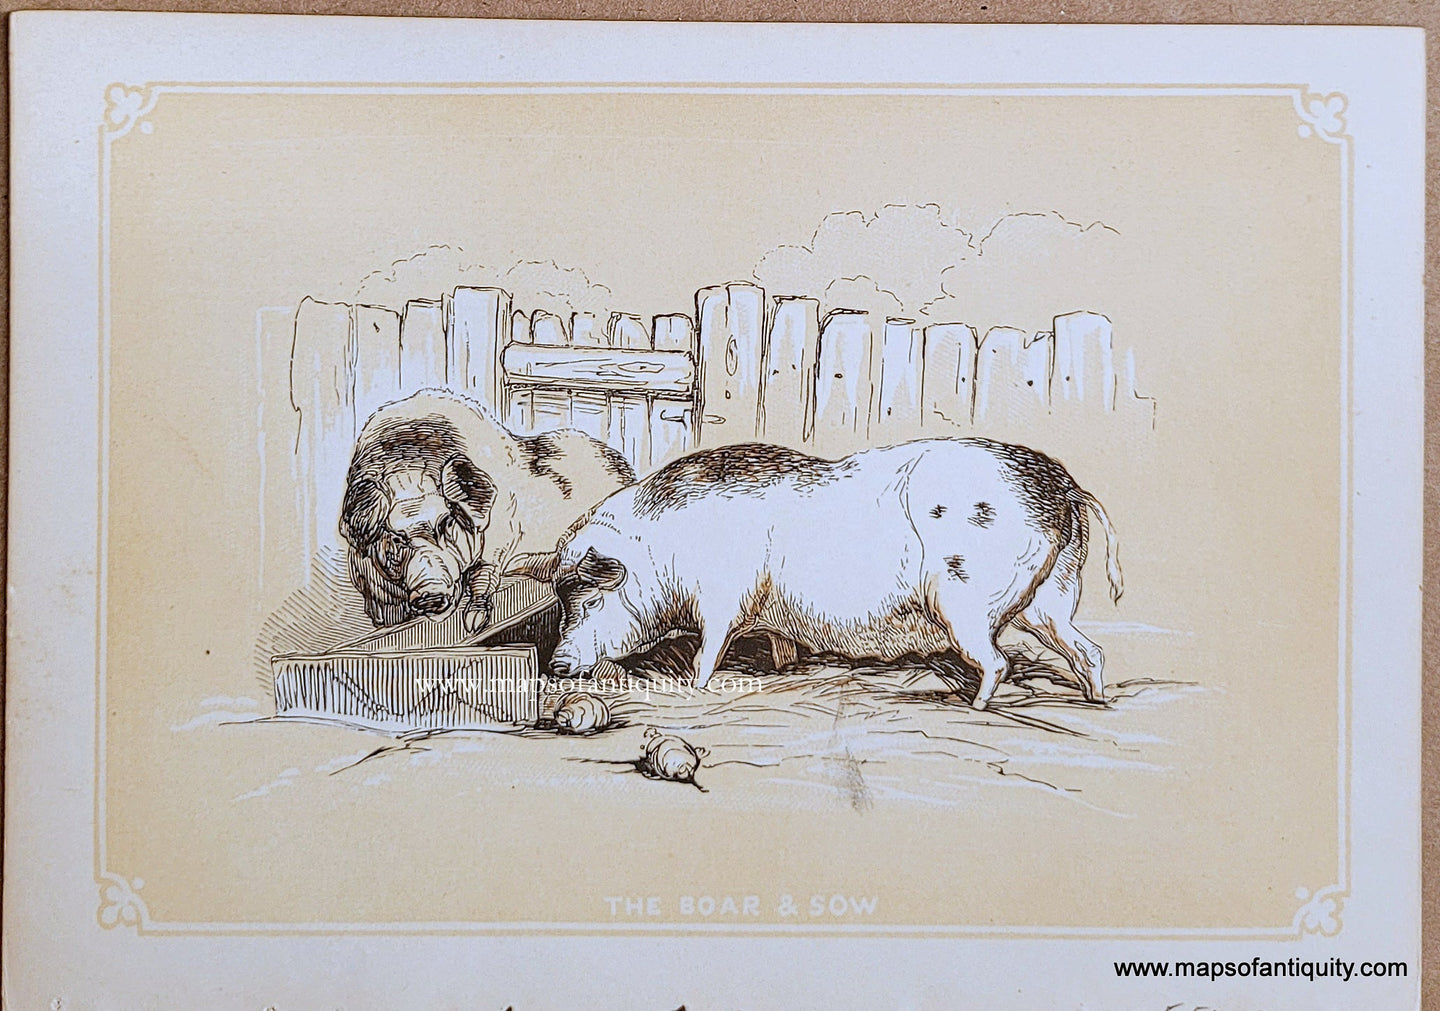 Genuine-Antique-Print-Boar-&-Sow-1850s-Tallis-Maps-Of-Antiquity